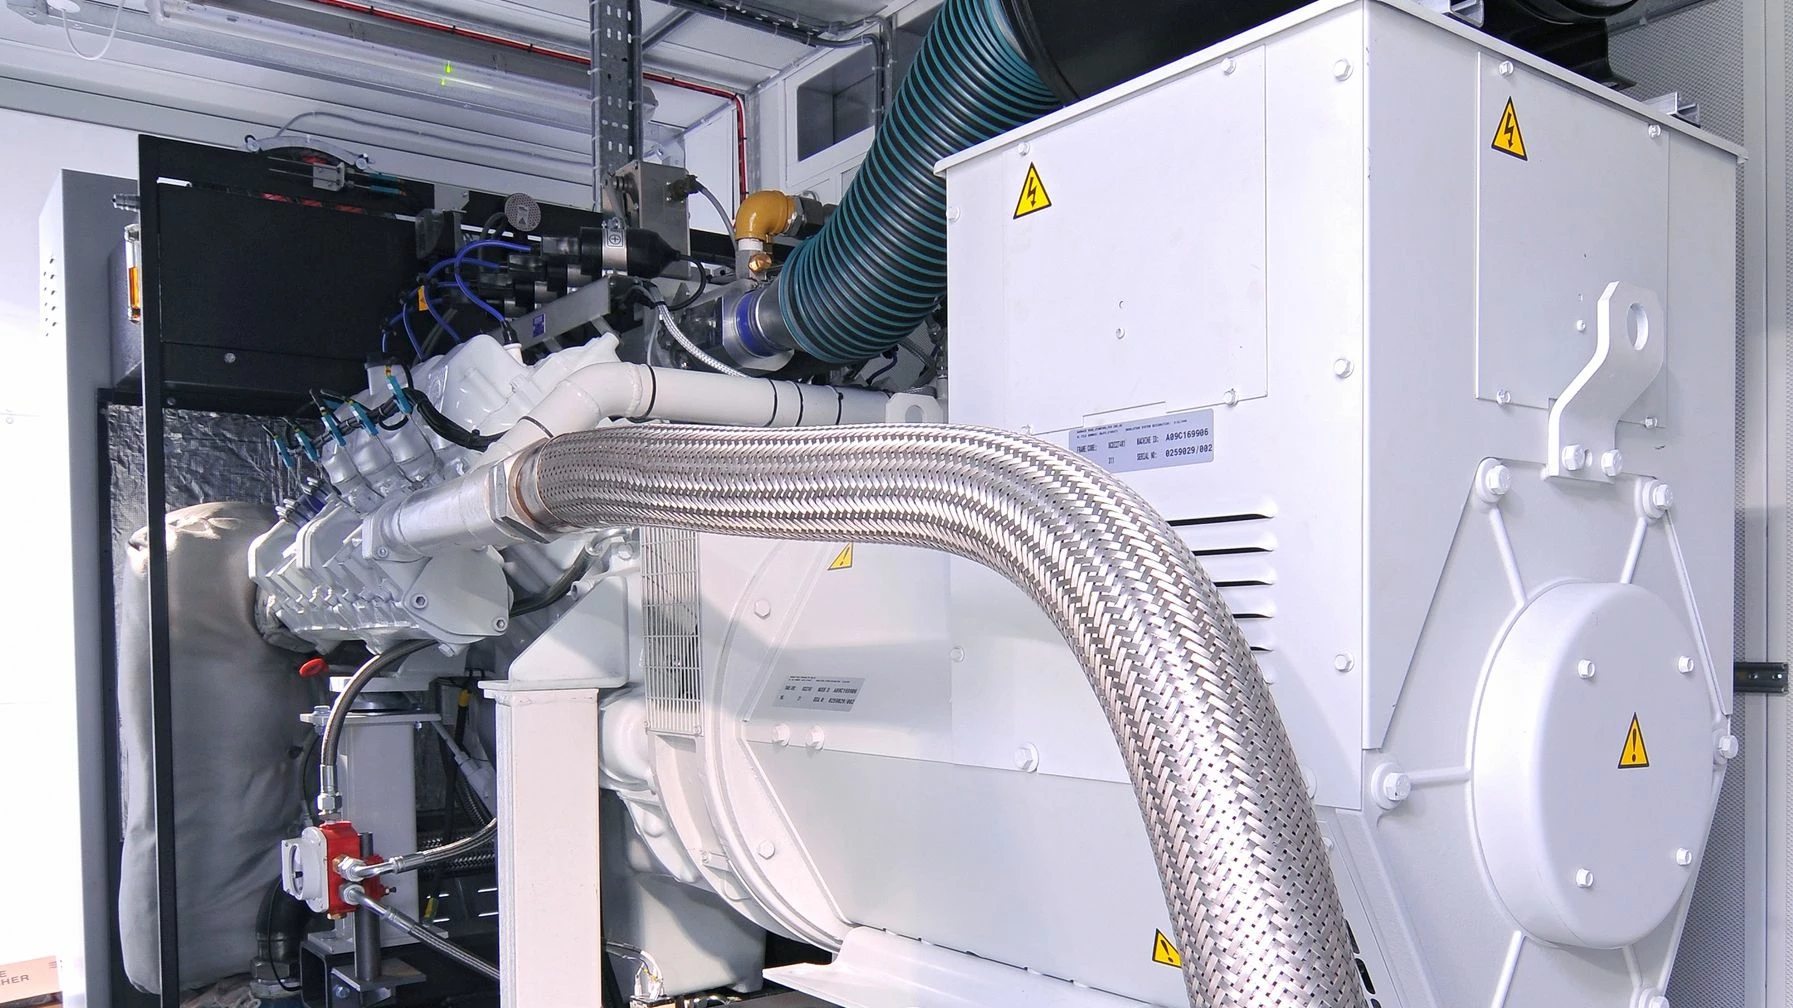 ENER-G CHP system - manufactured in Salford